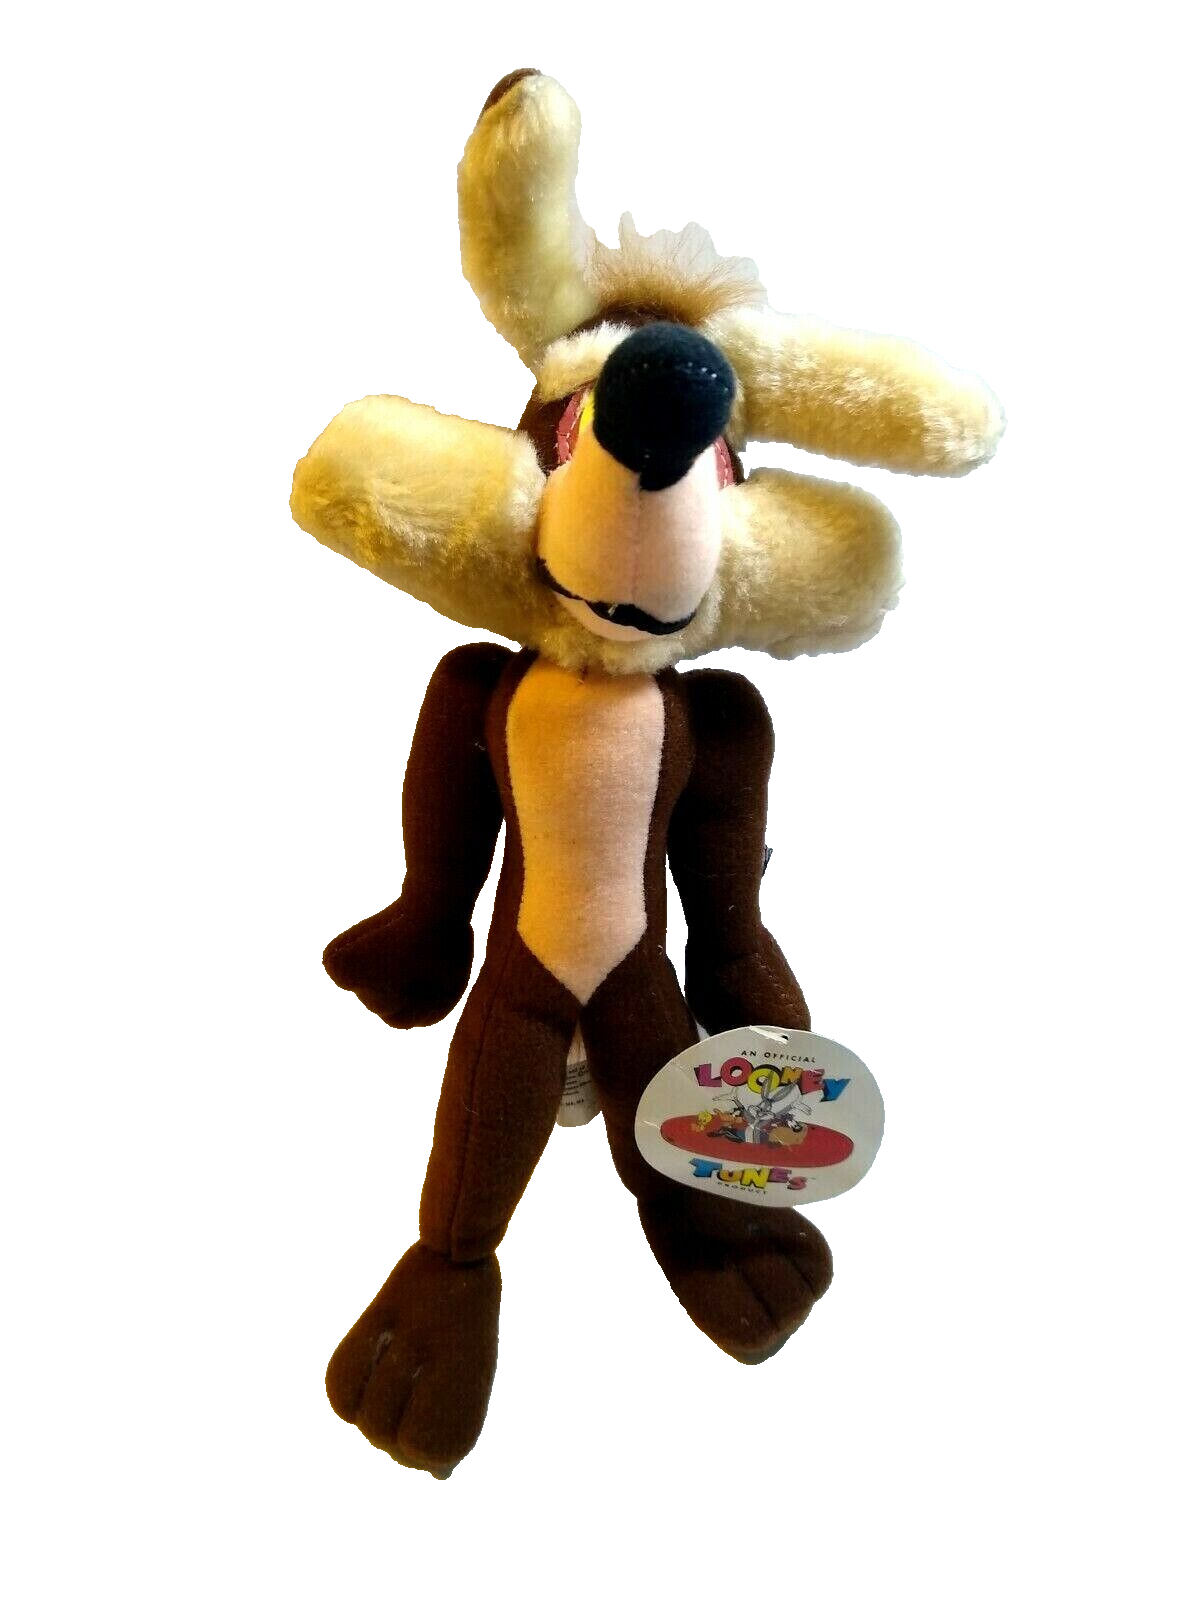 Wile E Coyote Plush Doll 12" Stuffed Toy Figure With Tags Ace 1996  Looney Tunes - $22.33